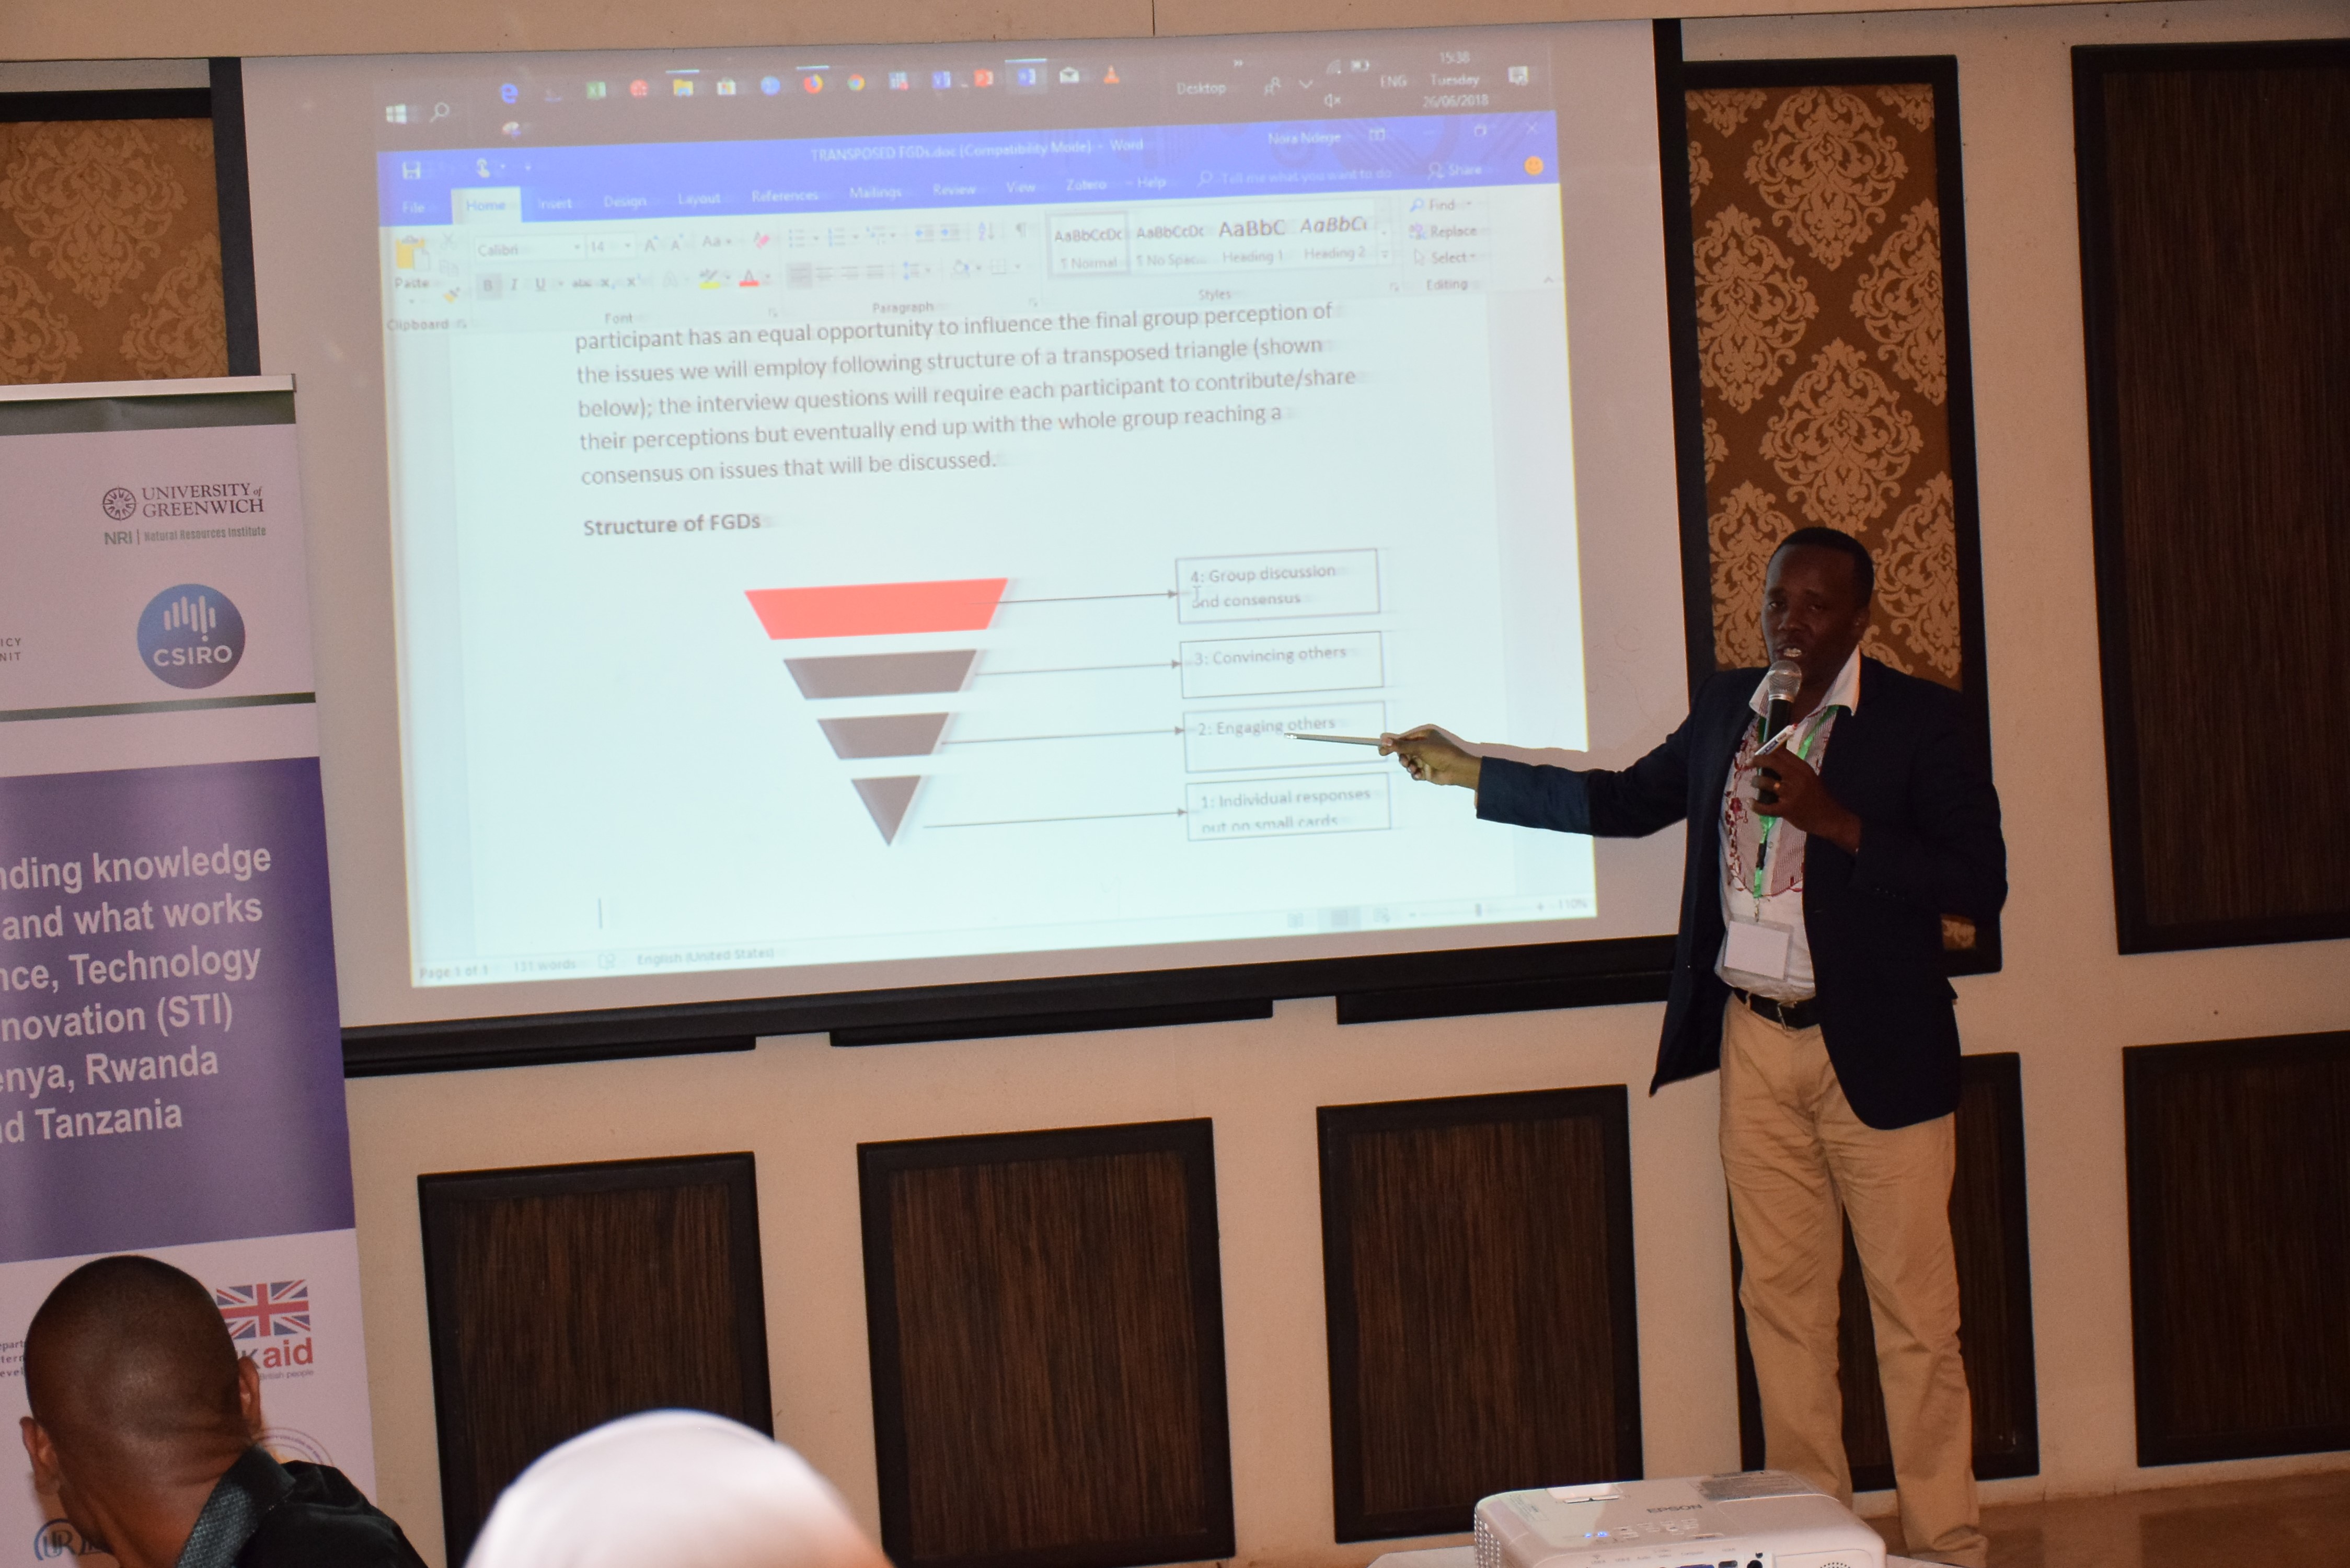 ACTS and Partners launches a study on Understanding of Knowledge Systems Project in Tanzania